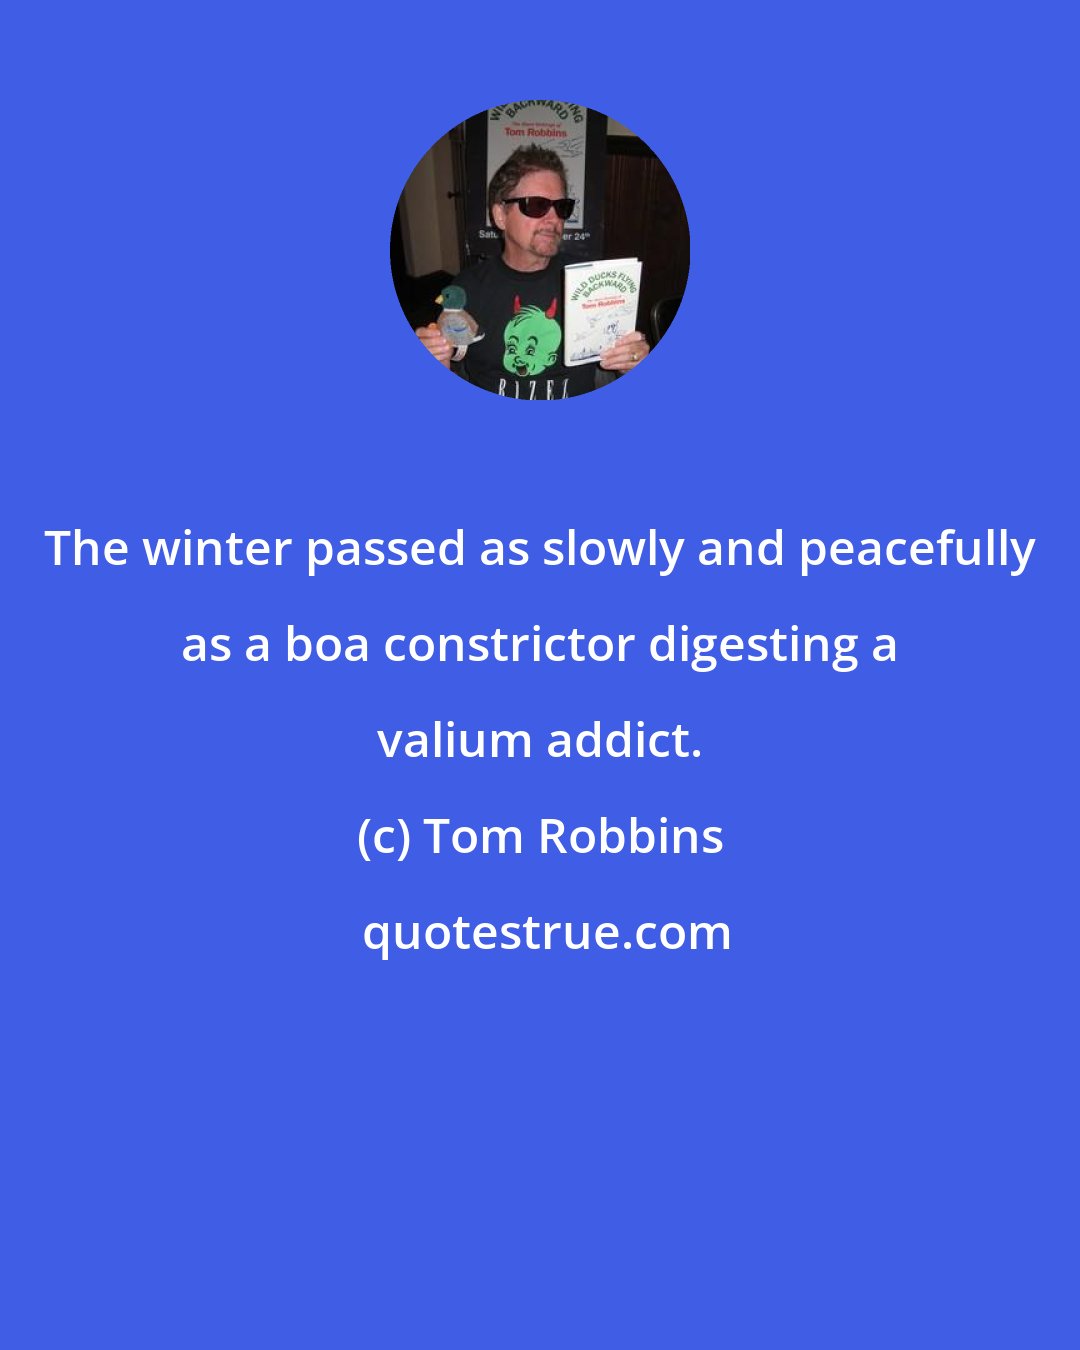 Tom Robbins: The winter passed as slowly and peacefully as a boa constrictor digesting a valium addict.